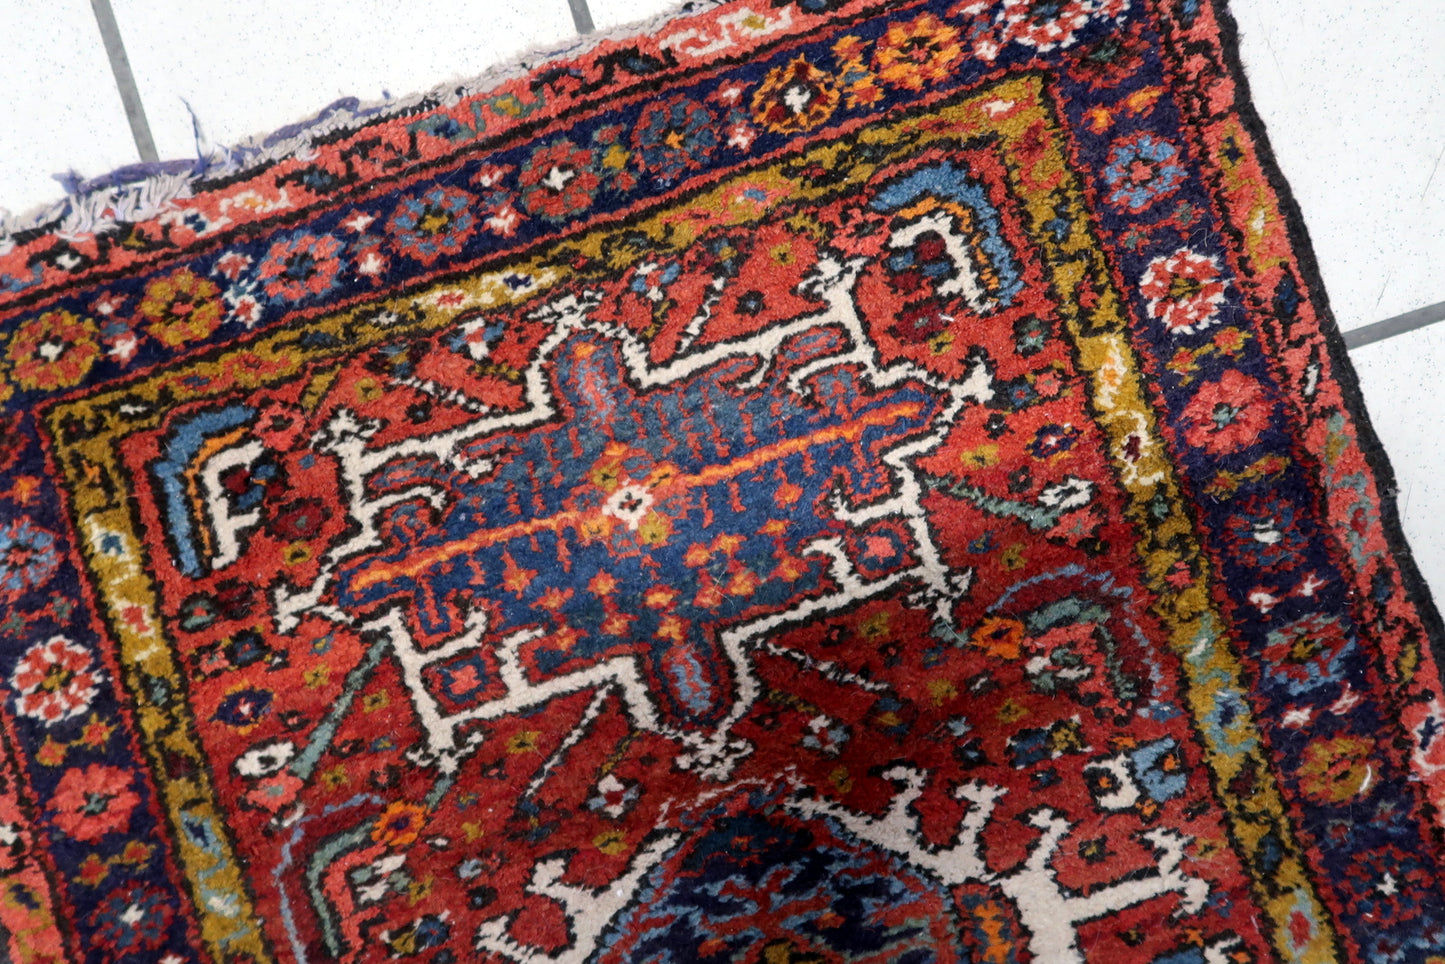 Close-up of the intricate geometric patterns on the Handmade Antique Persian Karajeh Rug